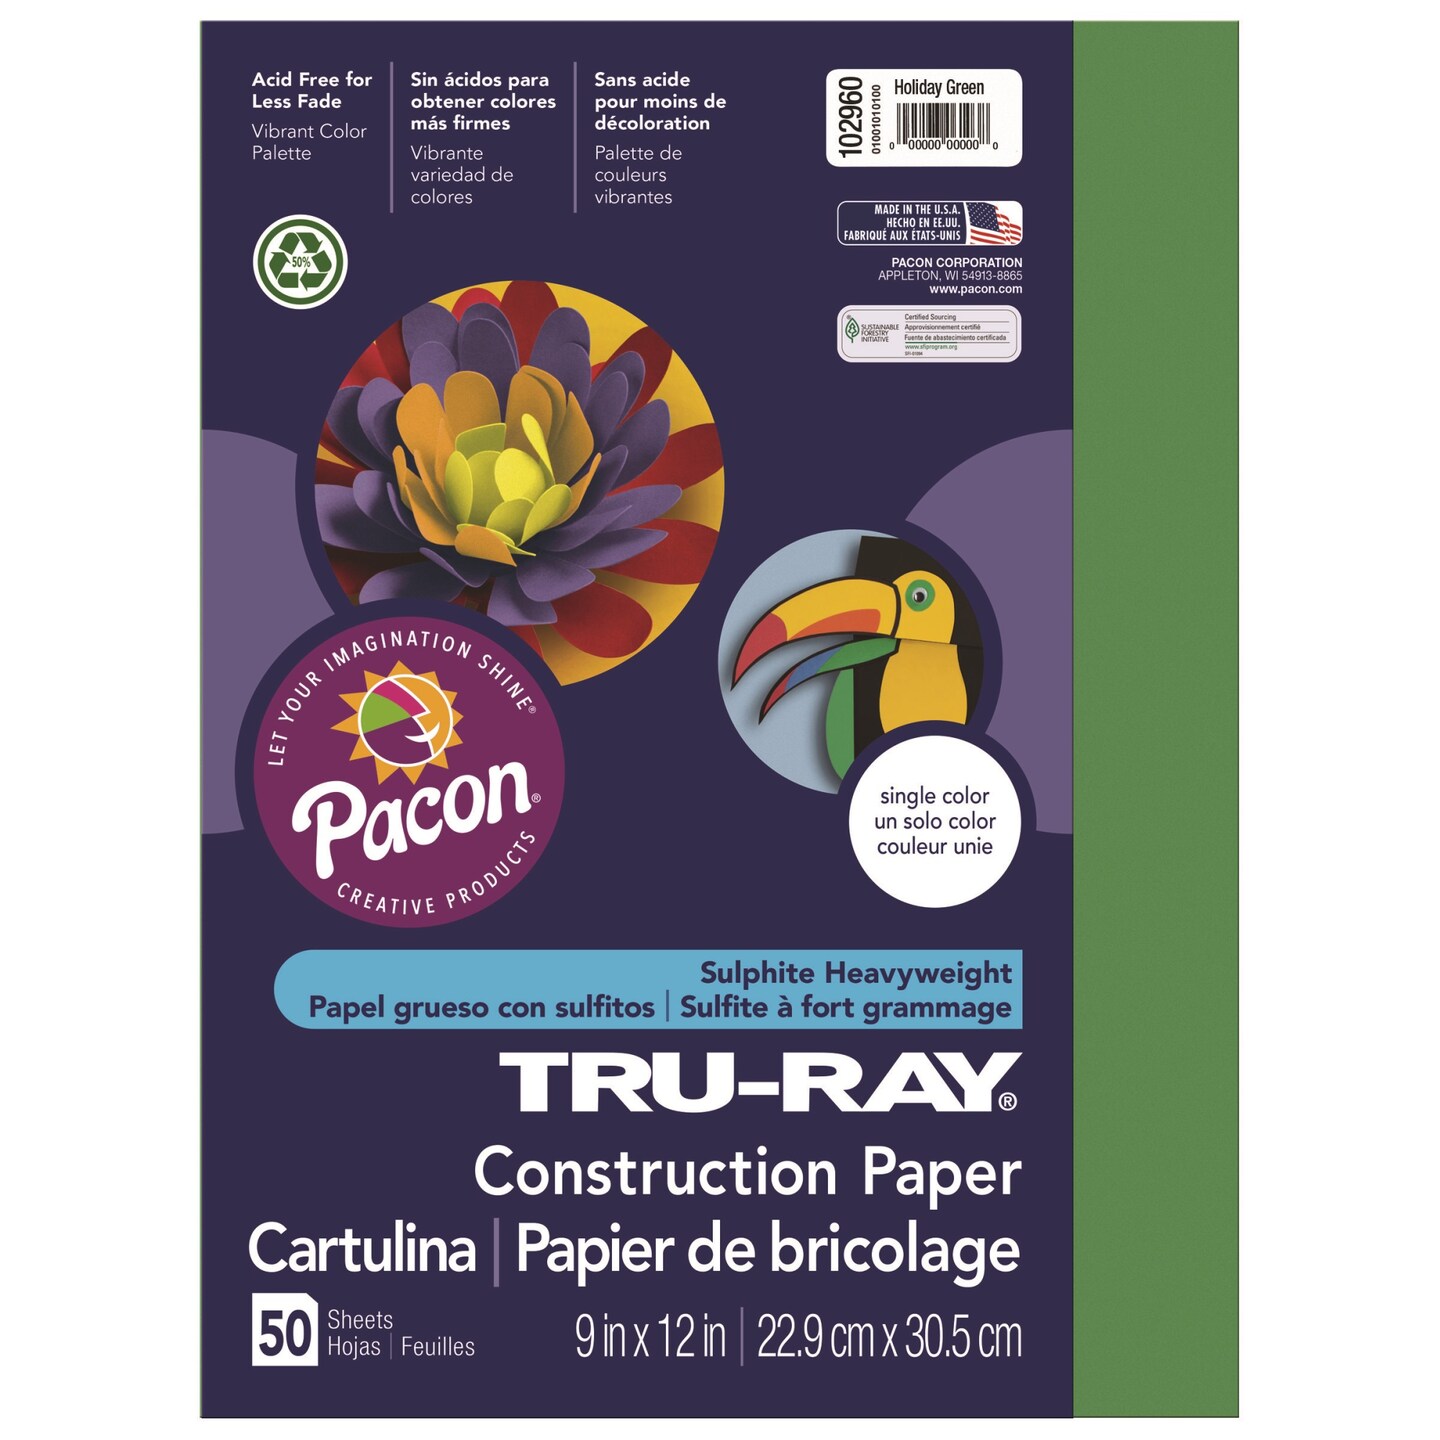 Pacon 102960 Tru-Ray Construction Paper, 76 Lbs, 9 X 12, Holiday Green, 50 Sheets/Pack